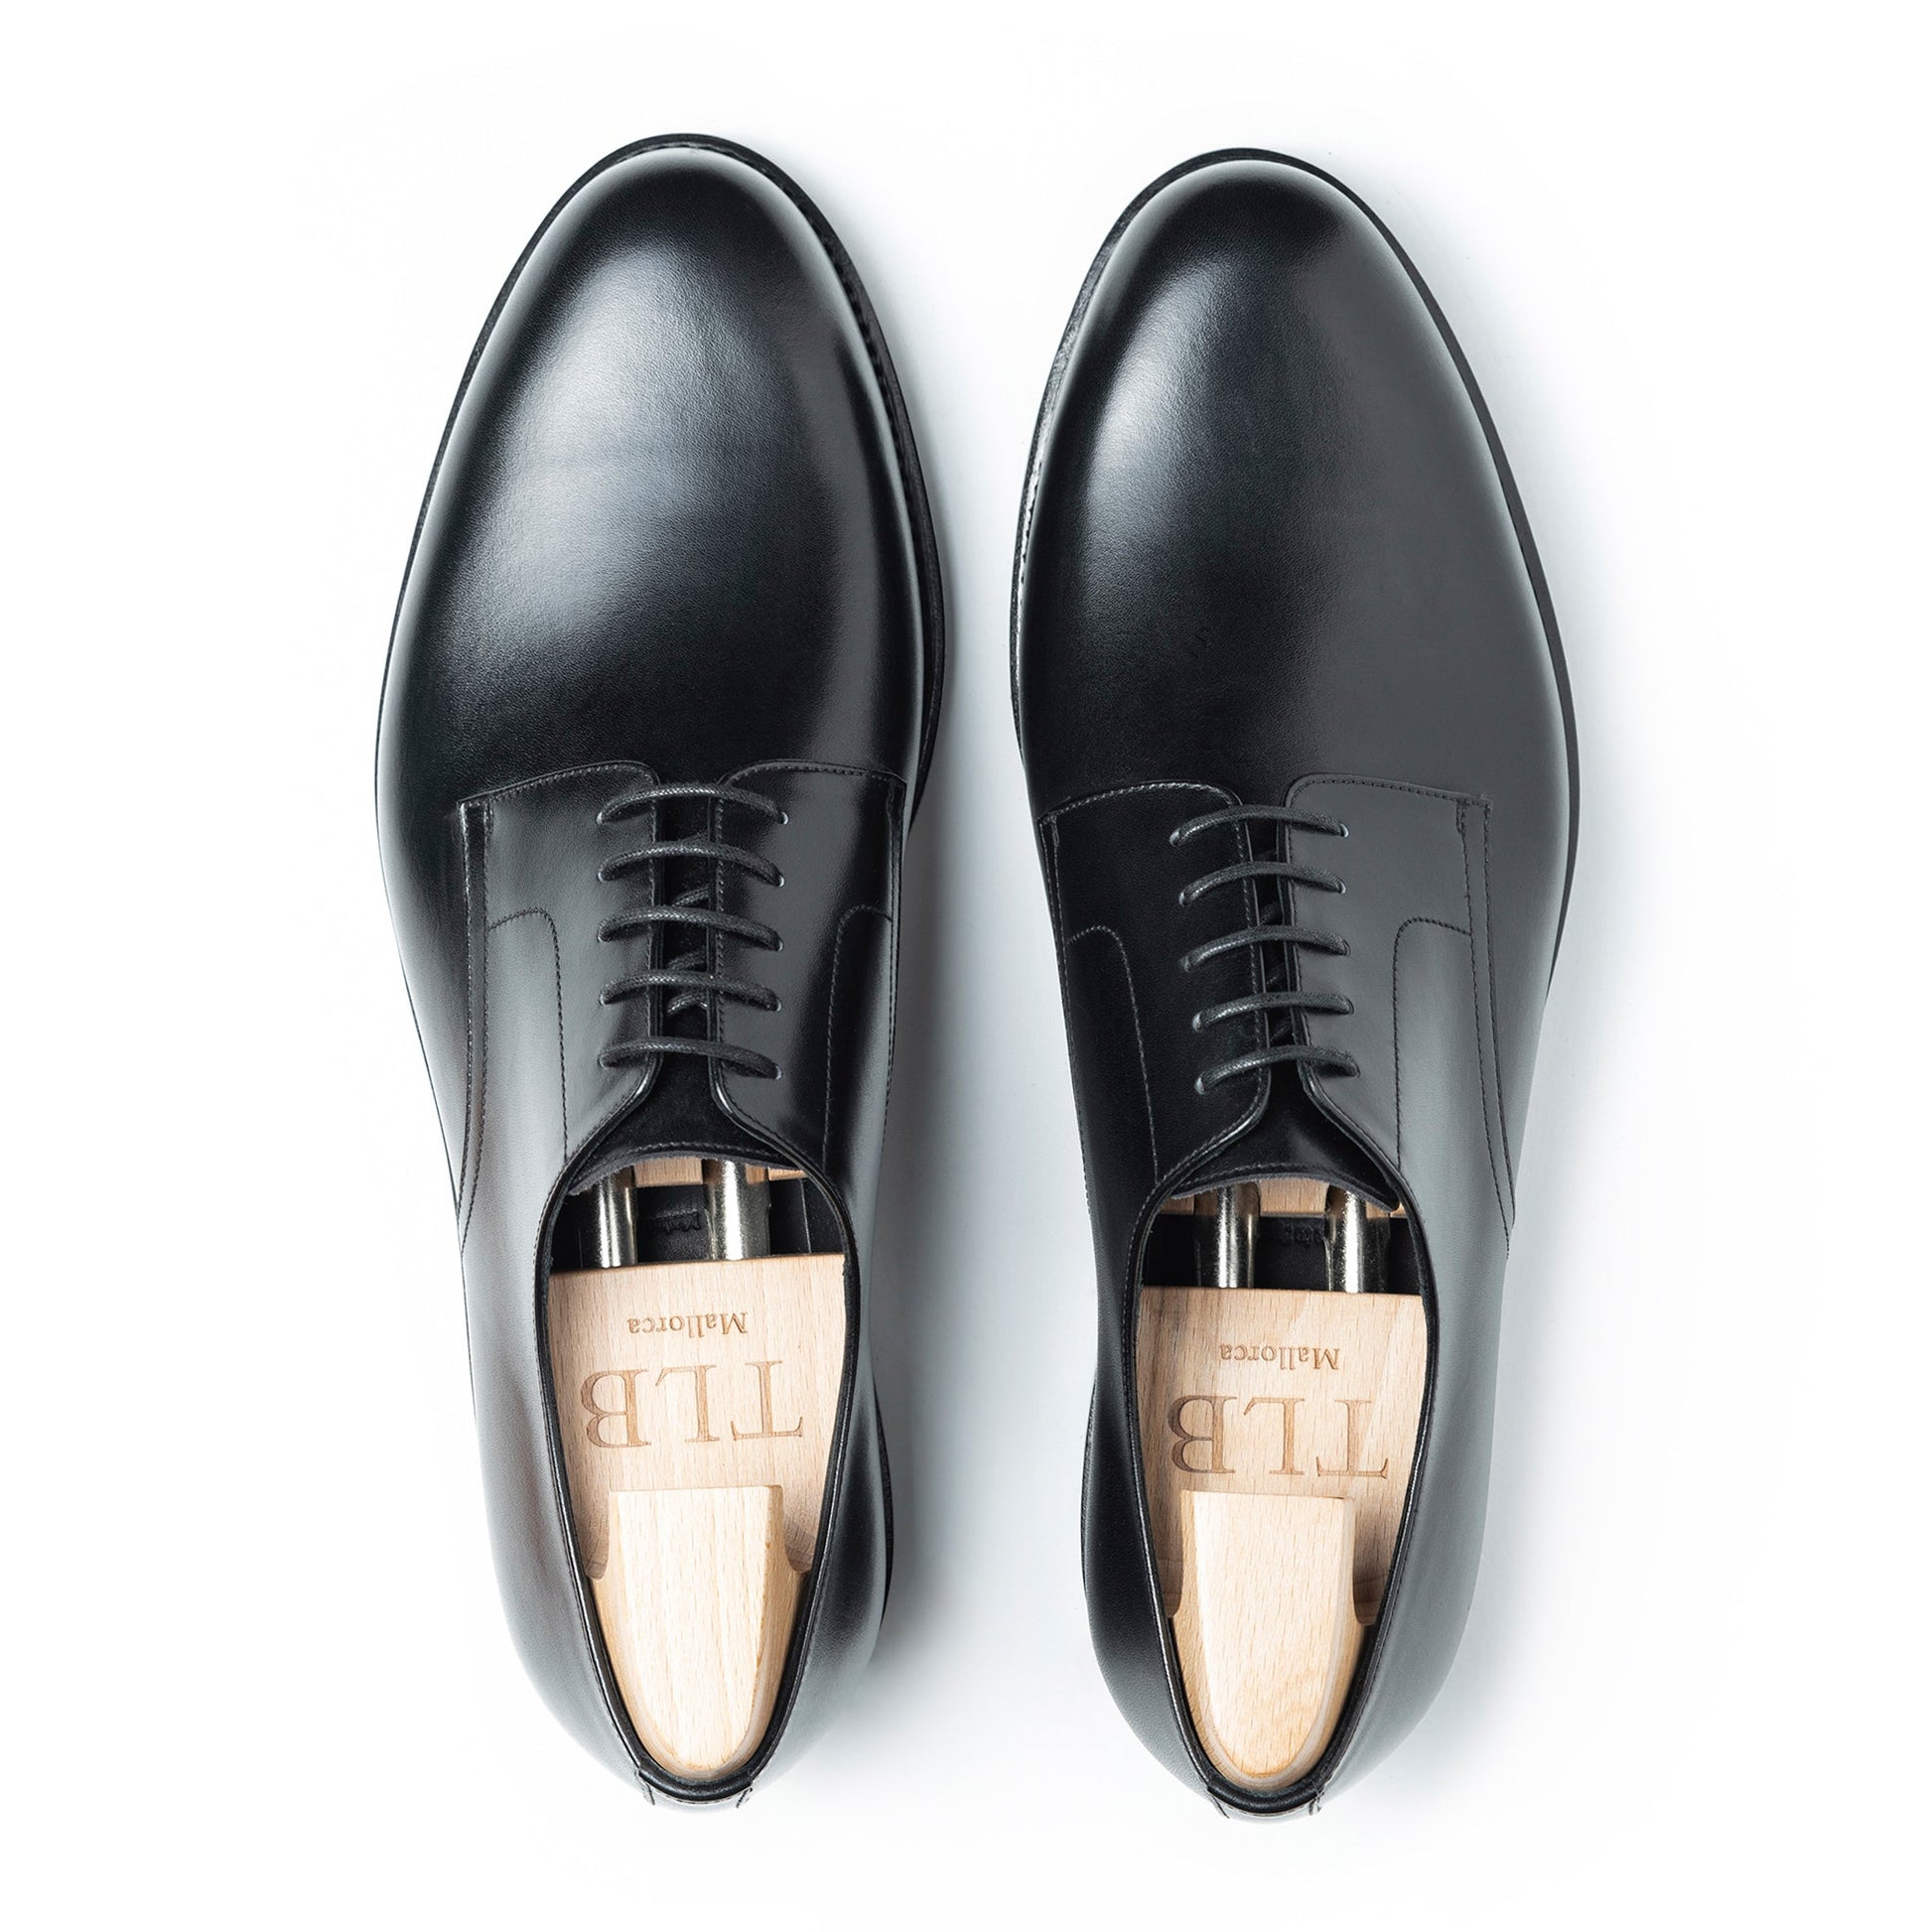 The best Derby shoes for men, British GQ